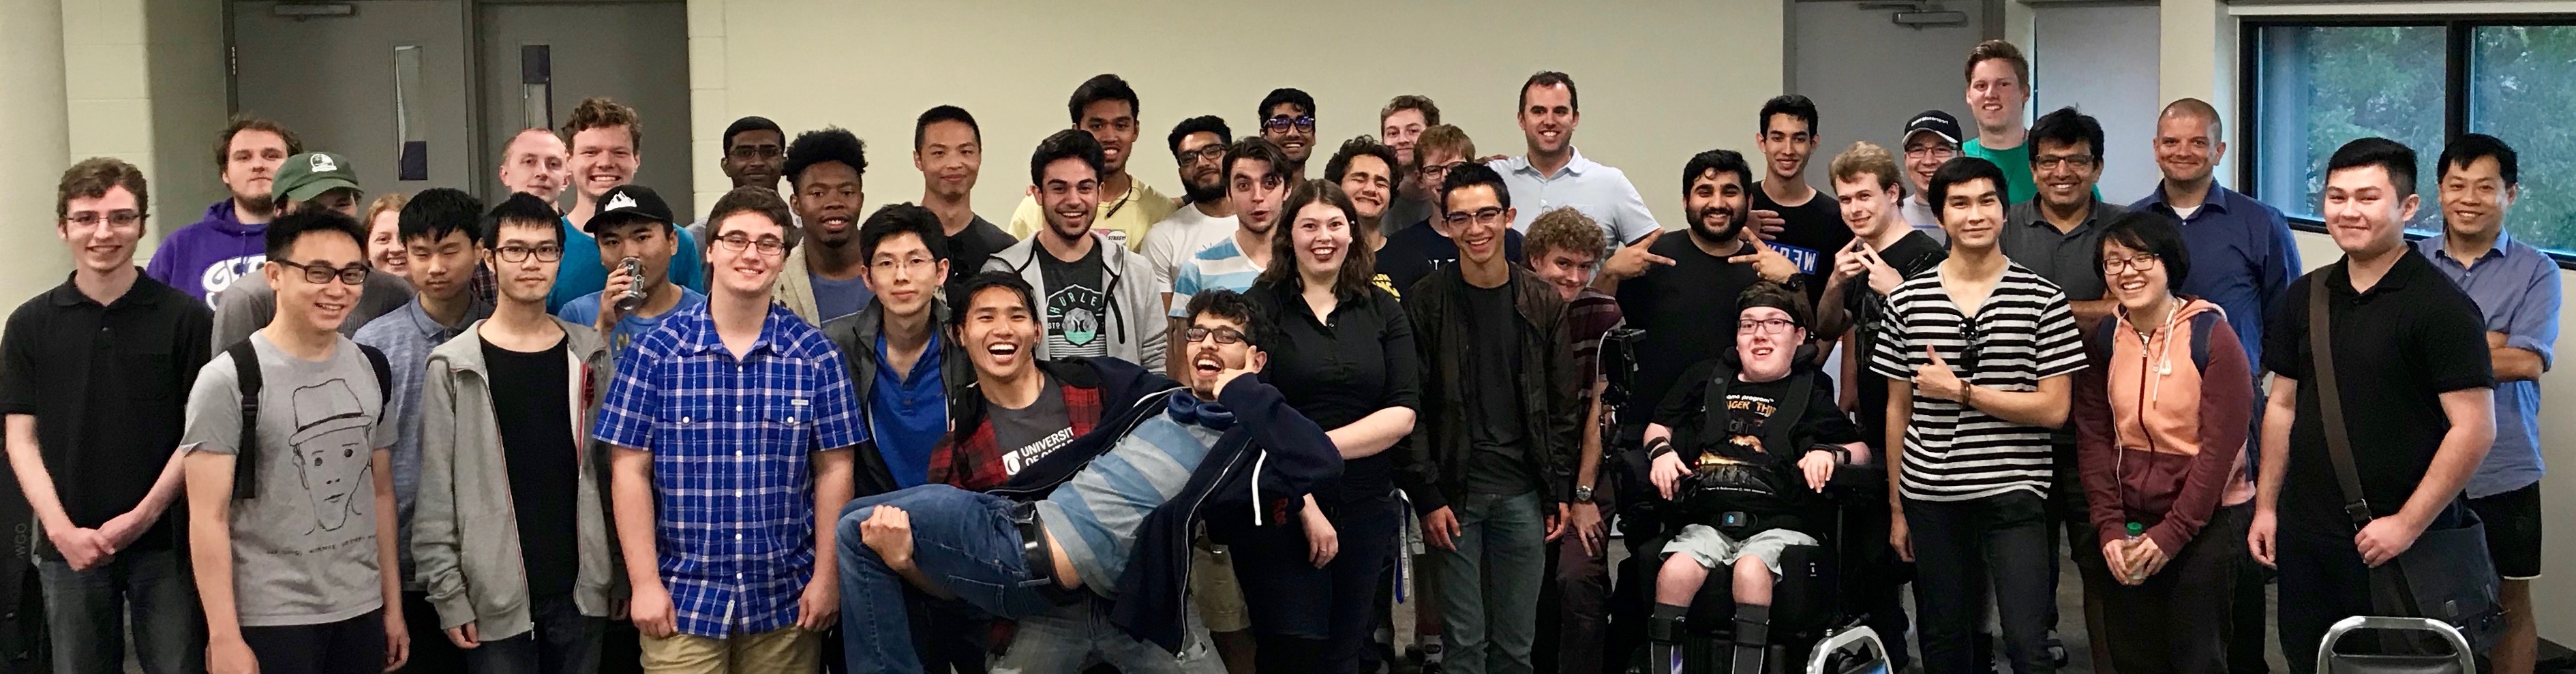 Computer Science students at the 2018 Fall Student Mixer